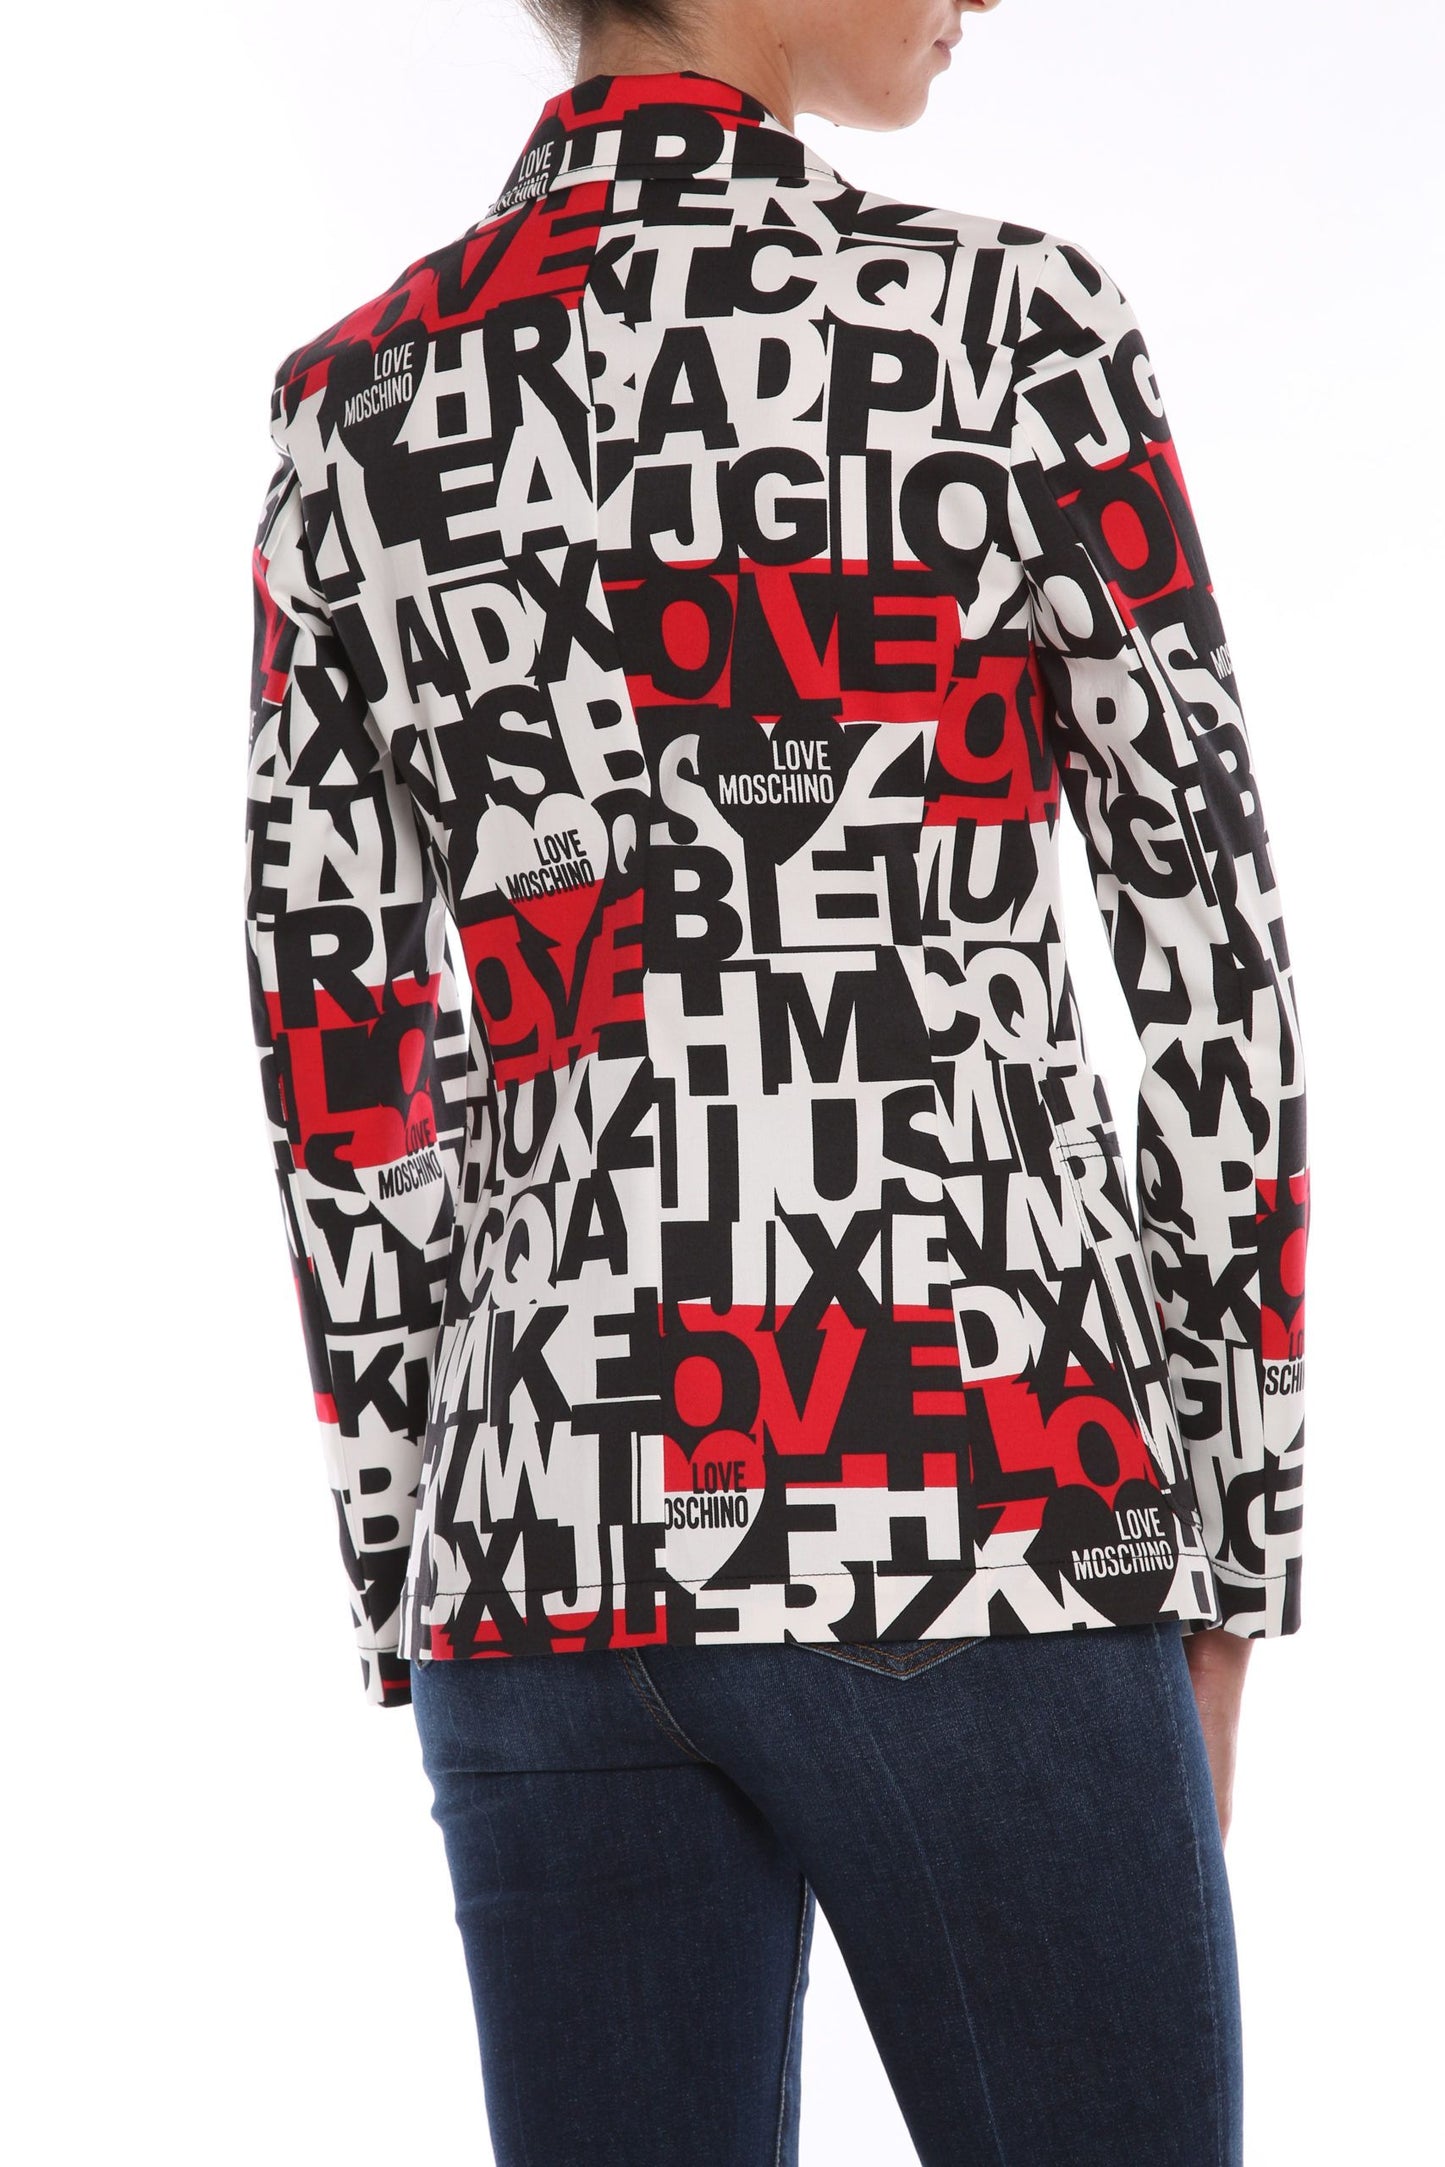 Chic Monochrome Love Moschino Jacket with Pops of Red